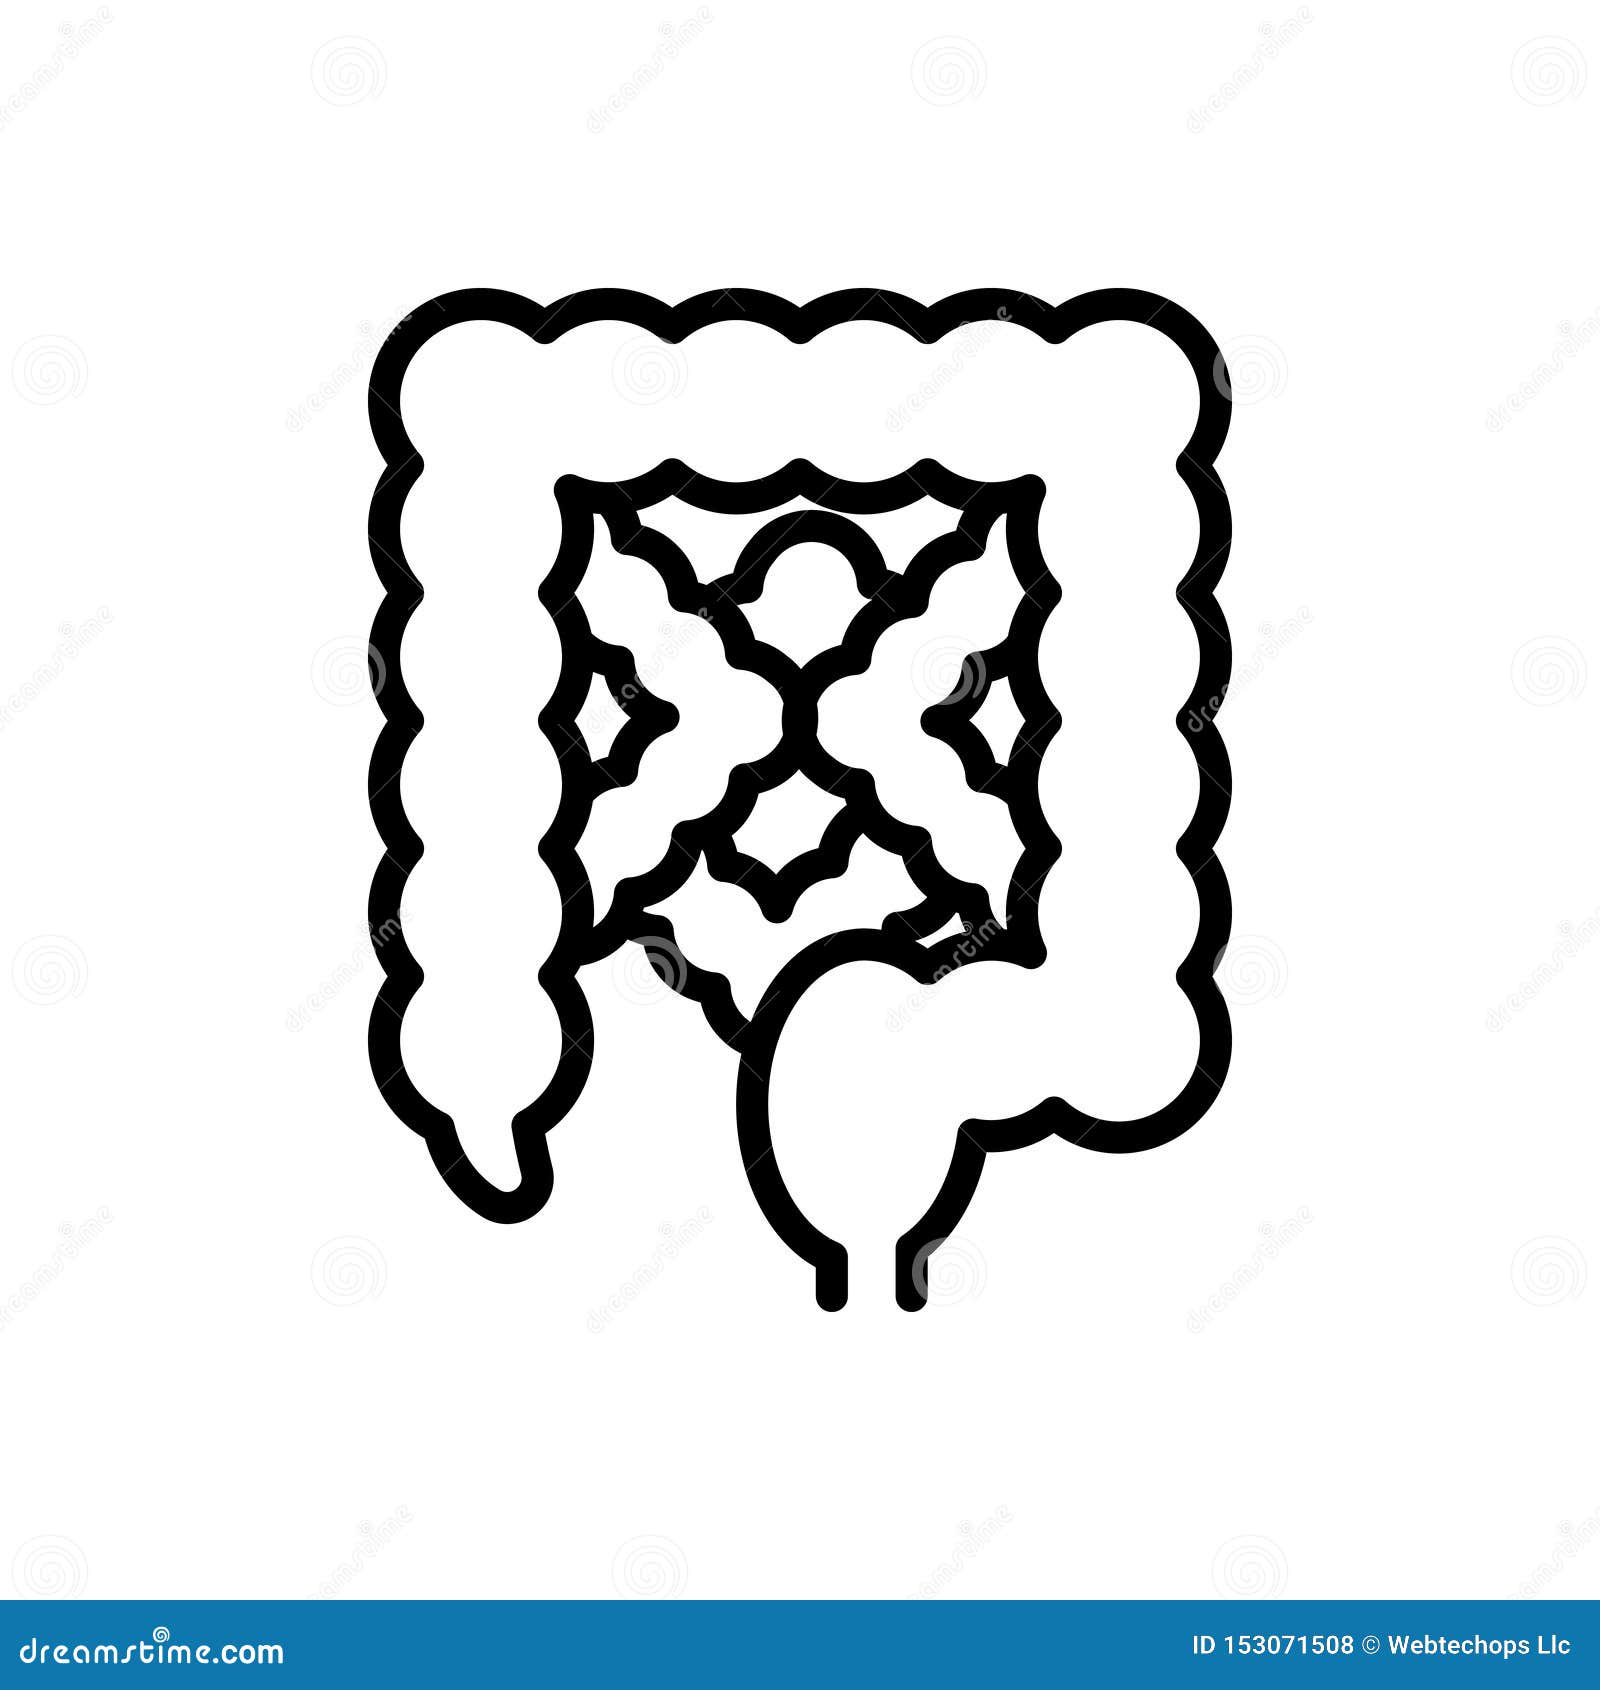 black line icon for intestine, alimentary and digestive